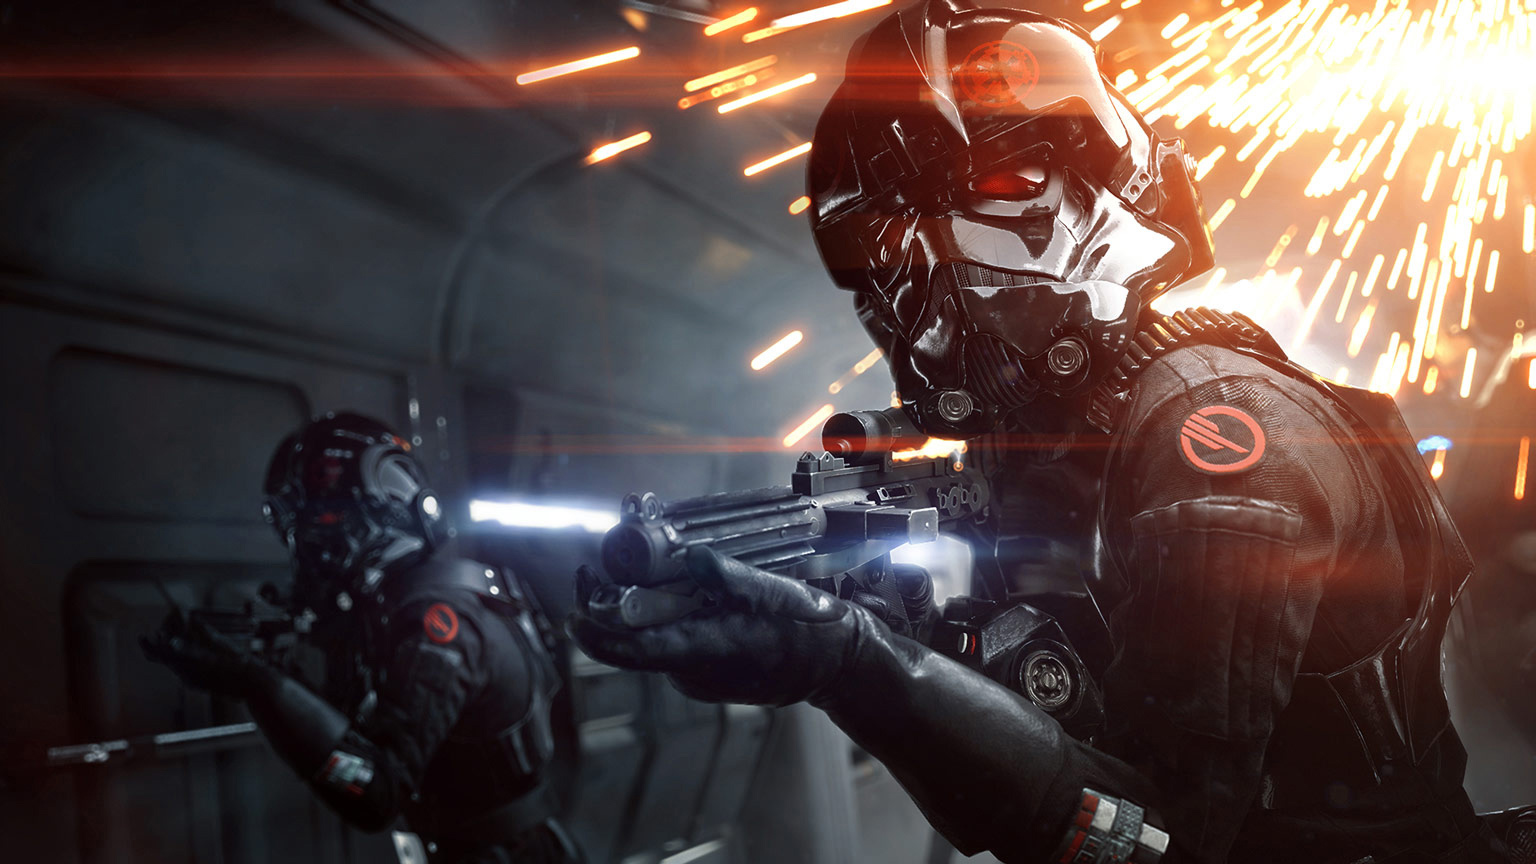 Star Wars Battlefront ll Review